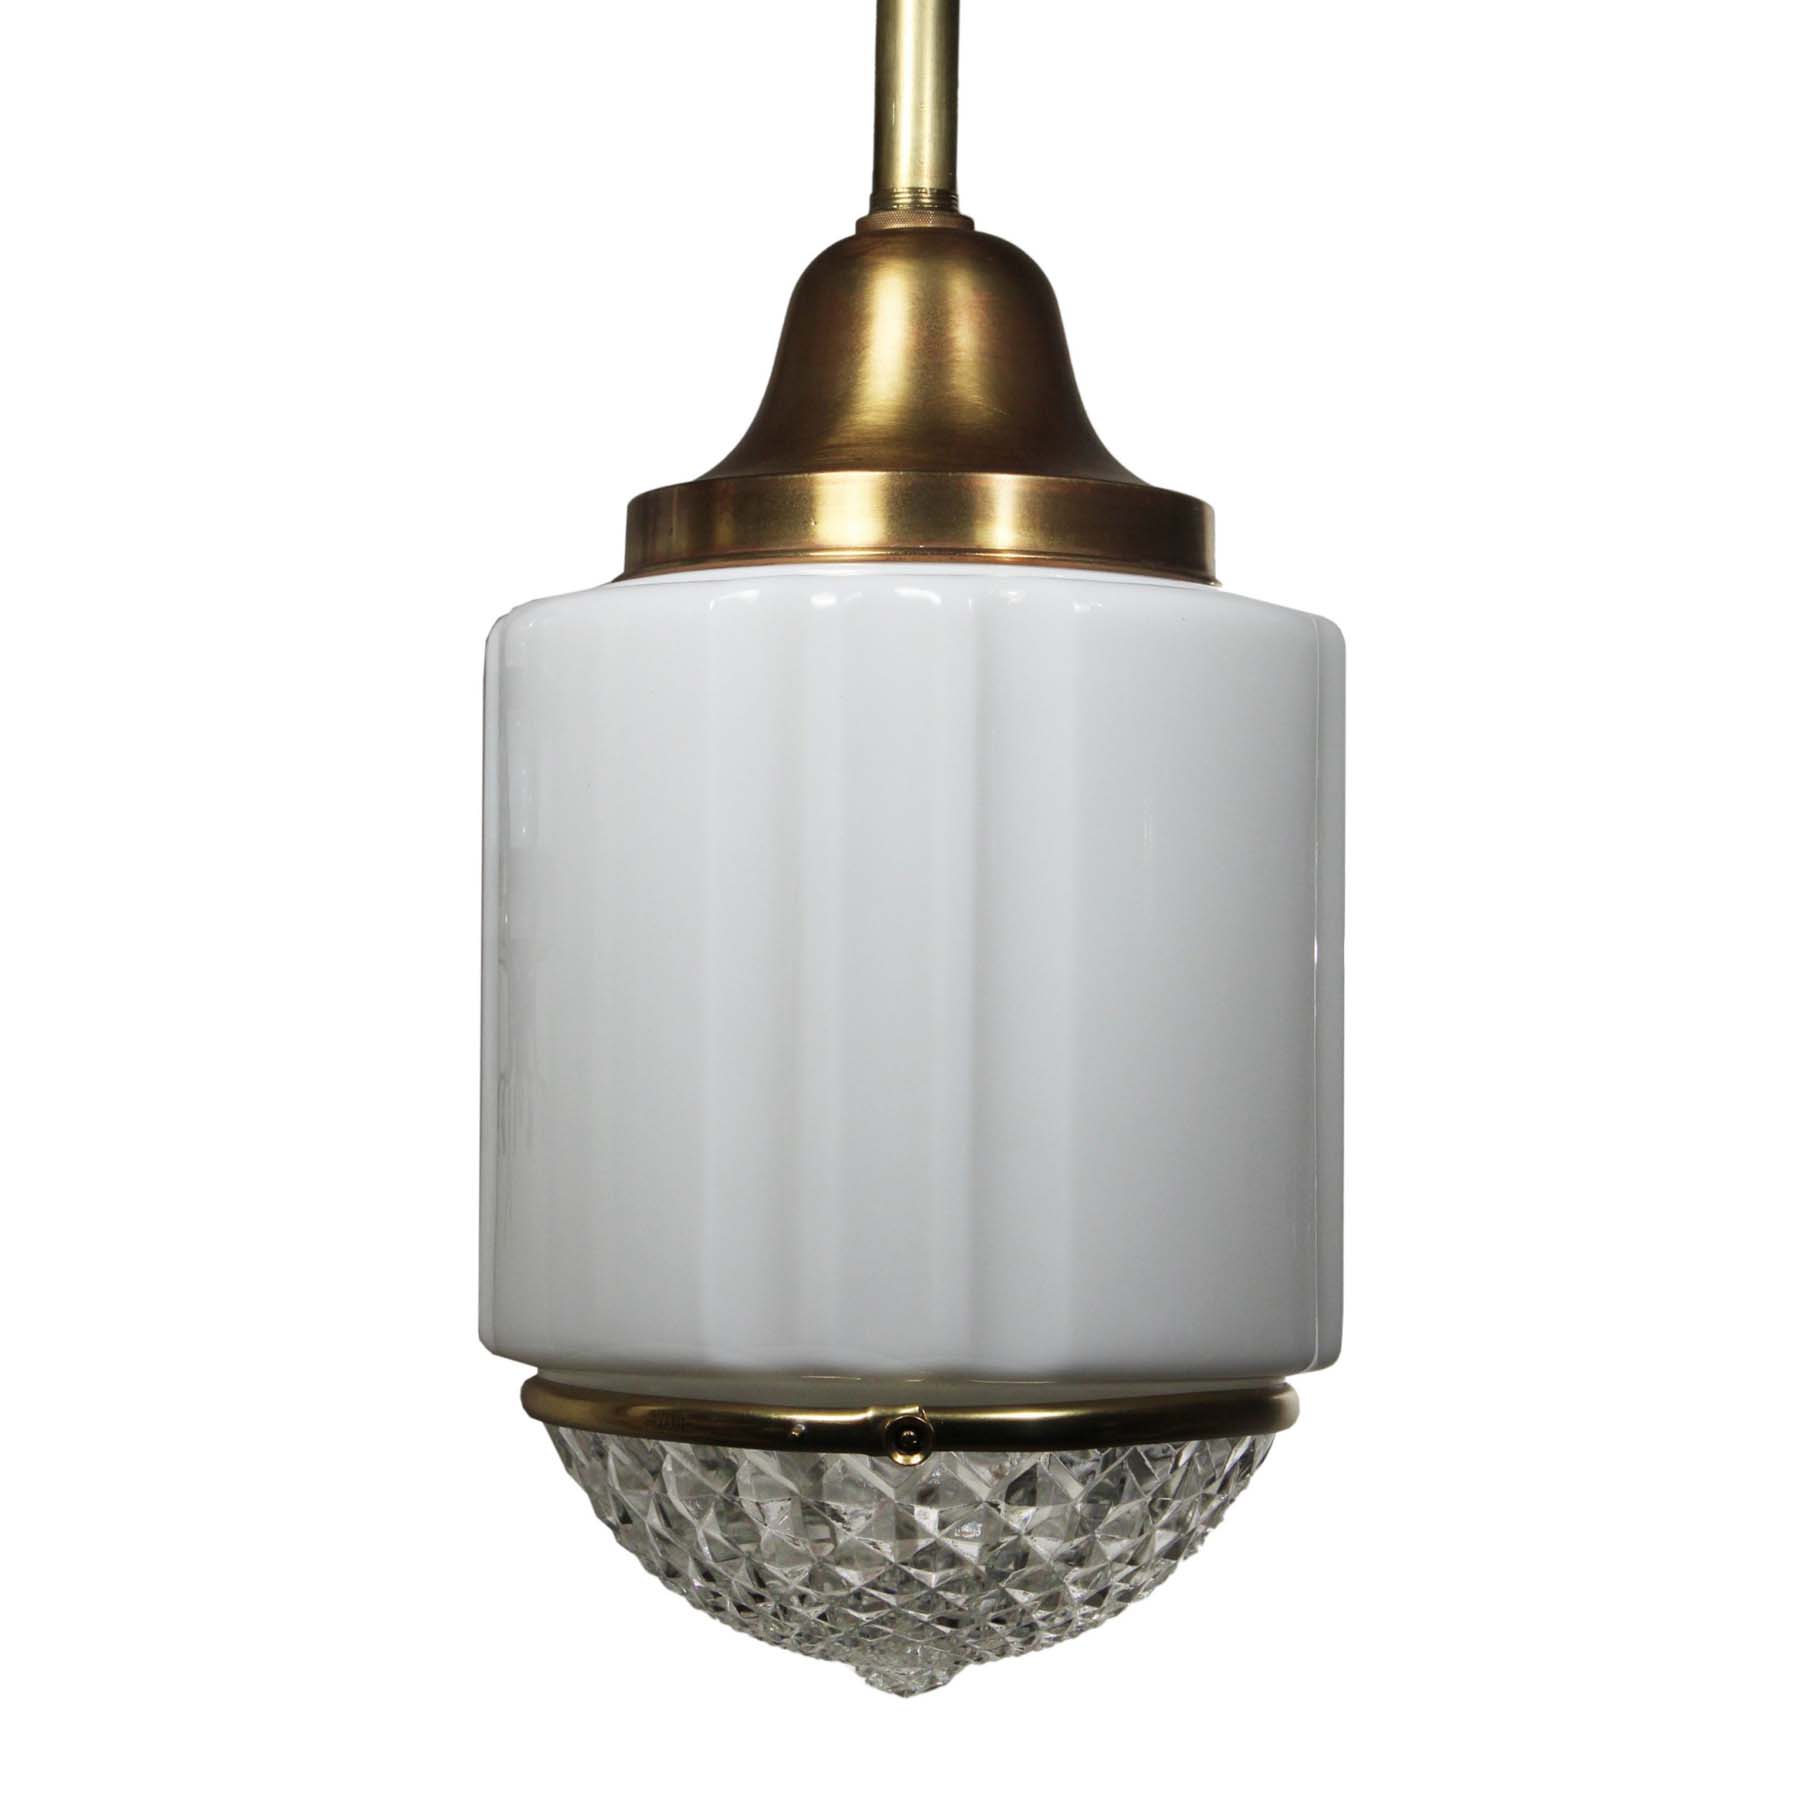 SOLD Antique Brass Art Deco Skyscraper Pendant Lights with Two-Part Prismatic Shade-0